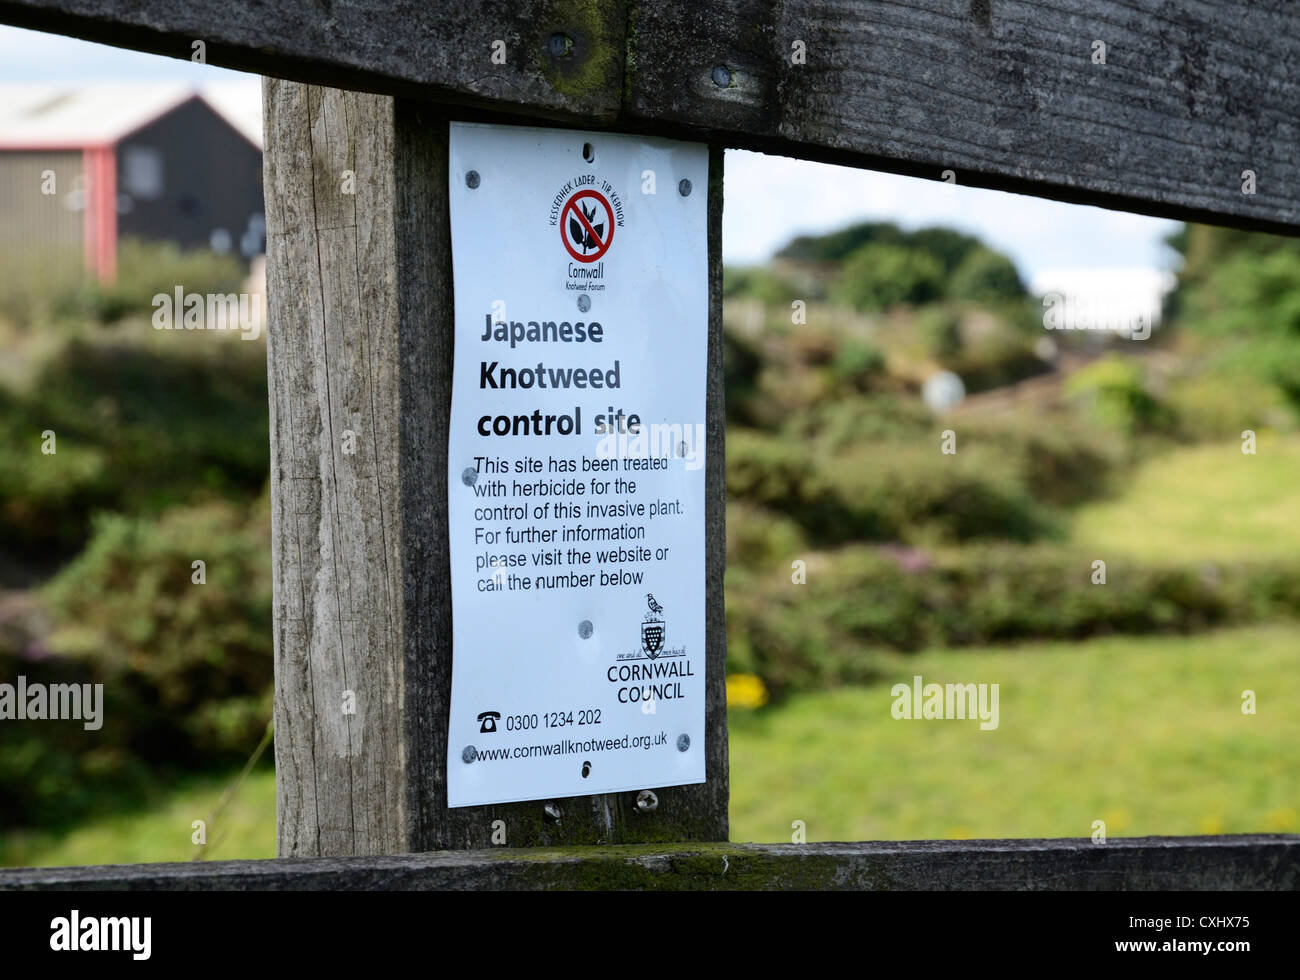 A Japanese Knotweed control site sign near Redruth in Cornwall, UK Stock Photo